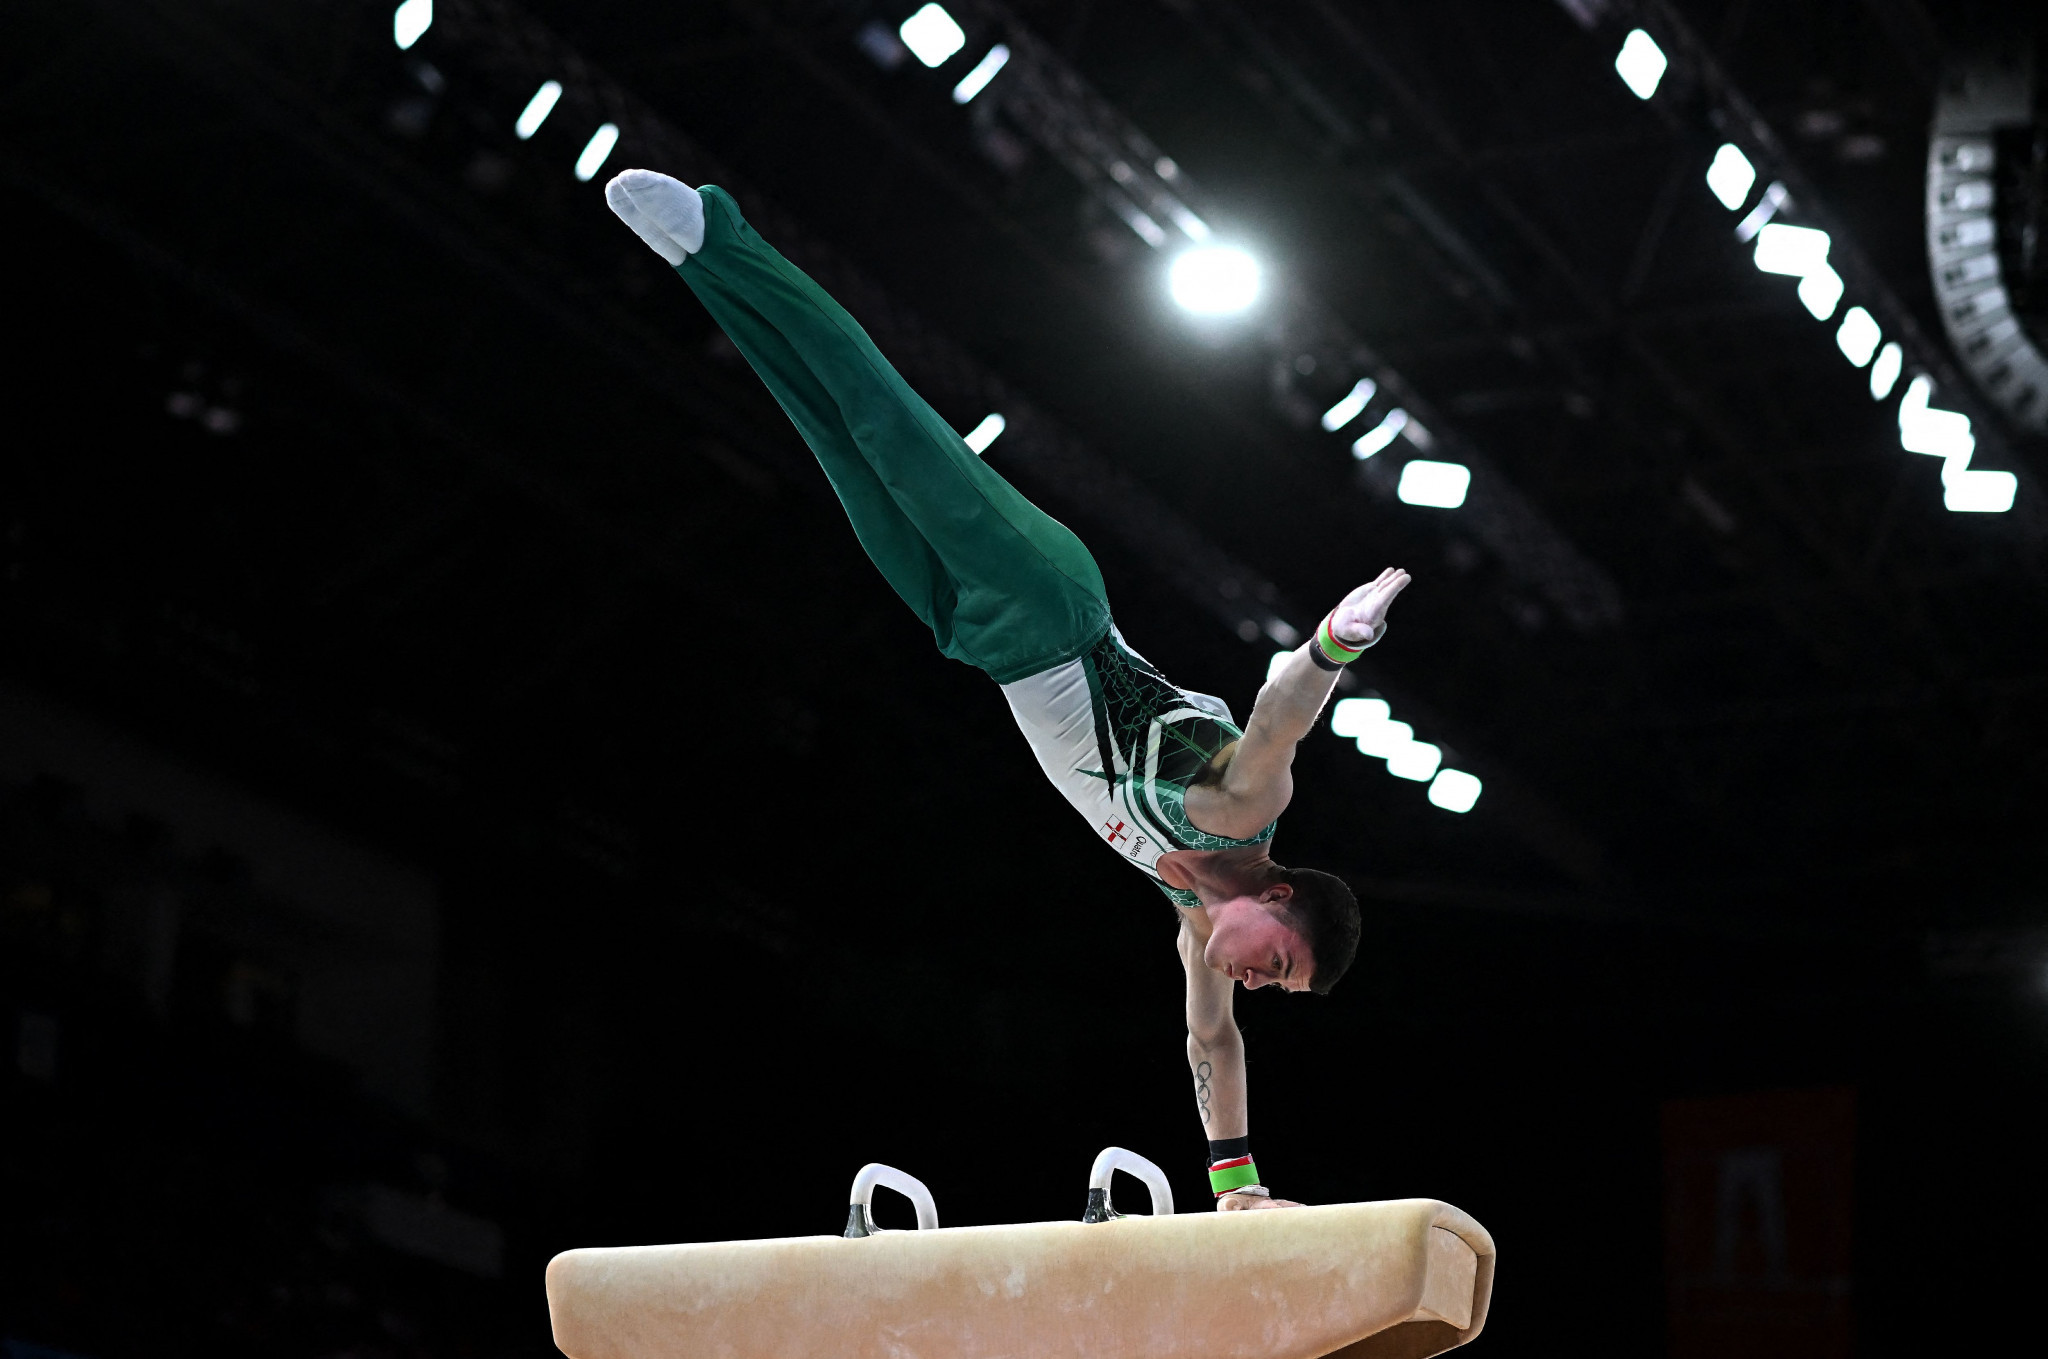 Rhys McClenaghan's participation was once in doubt, but thanks to an International Gymnastics Federation U-turn he mounted the pommel horse and won a silver medal ©Getty Images